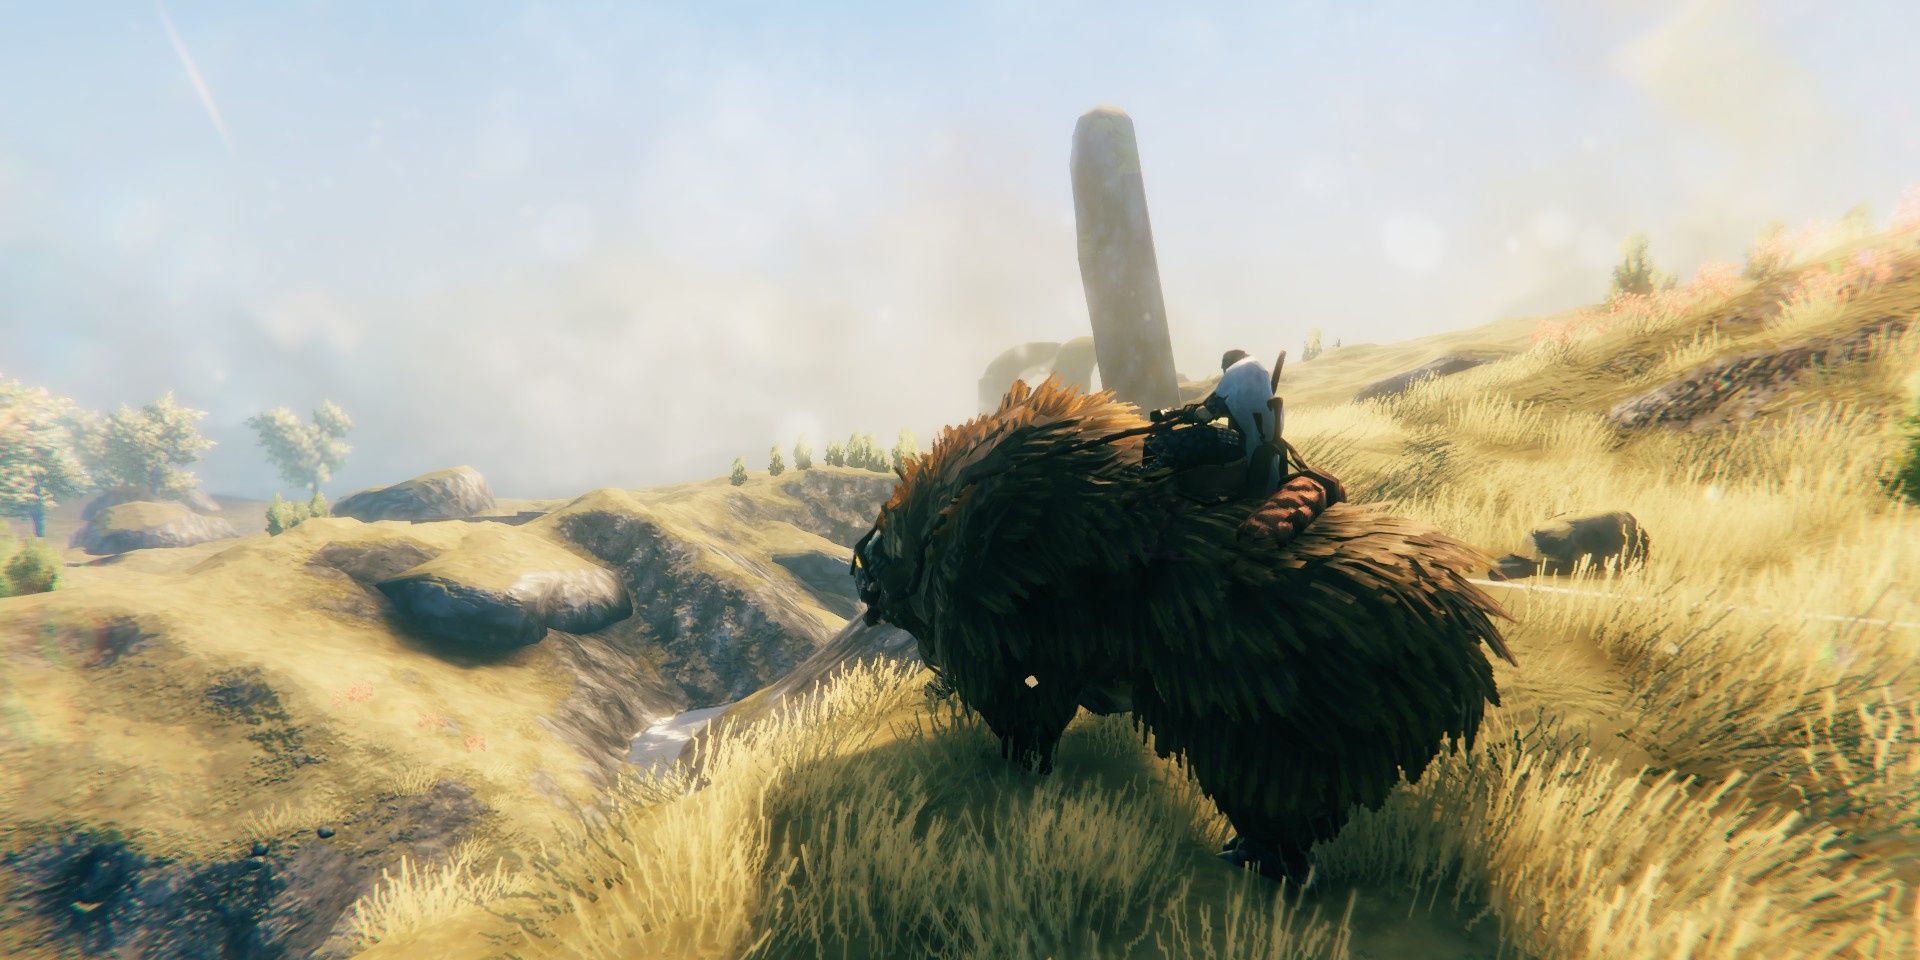 The player, riding on top of Lox, peers across the plains.